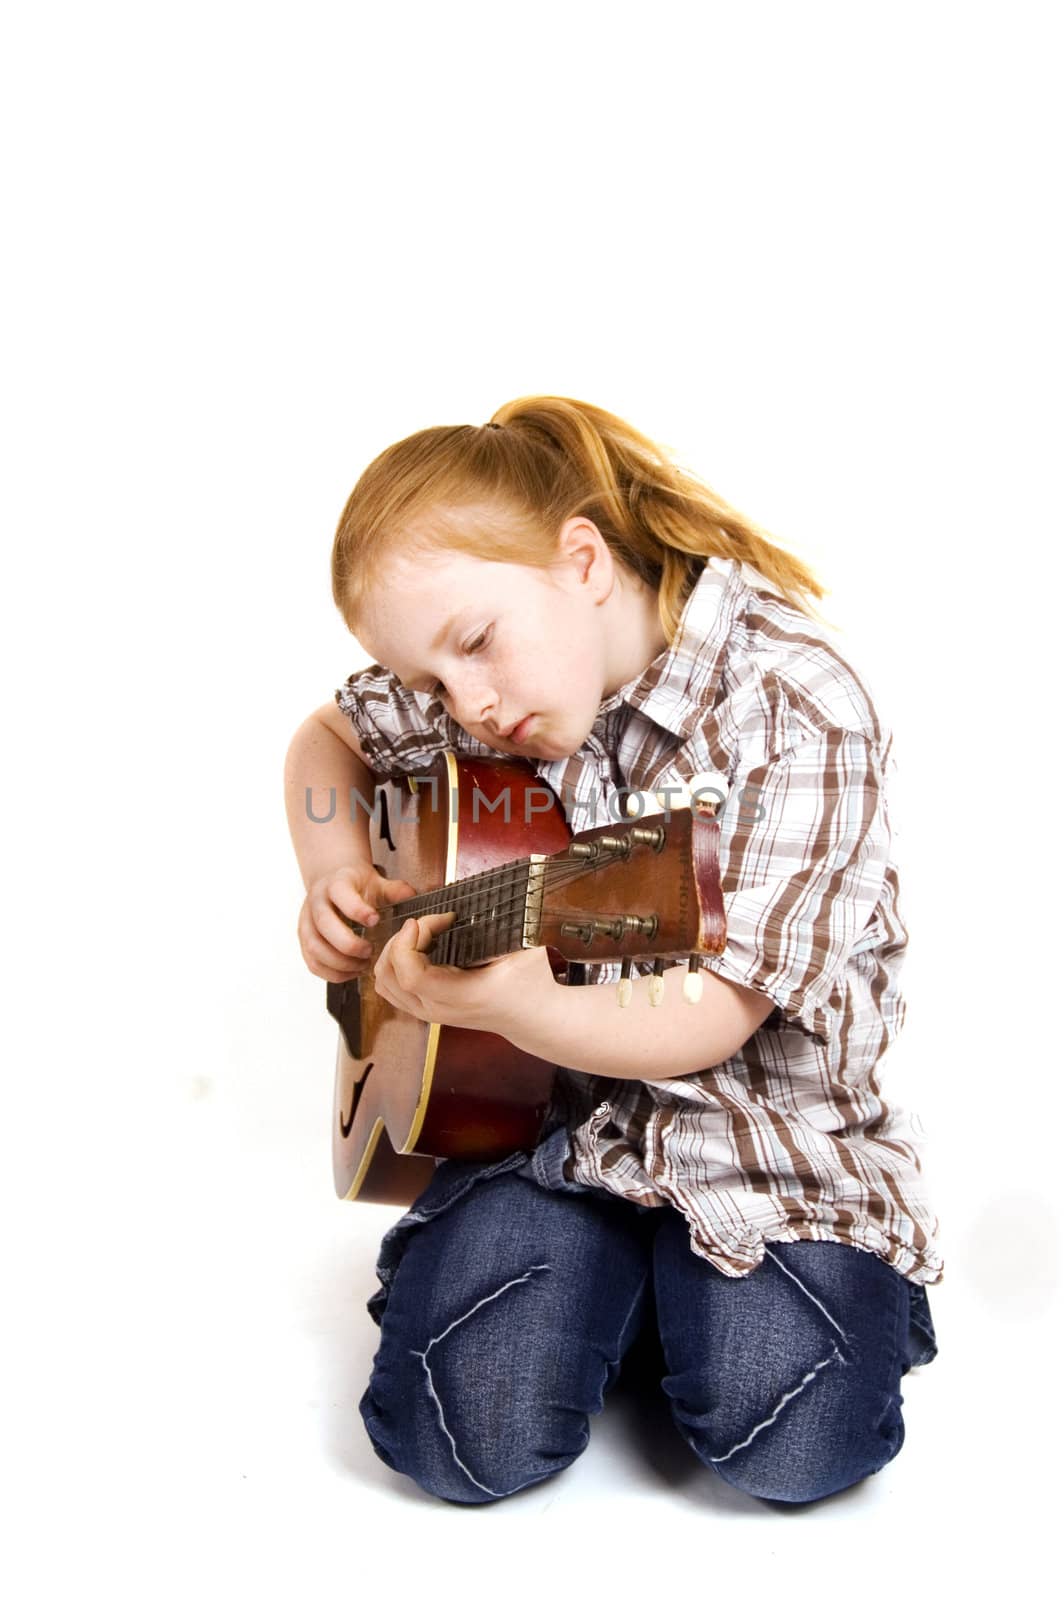 little girl playing on a guitar by ladyminnie